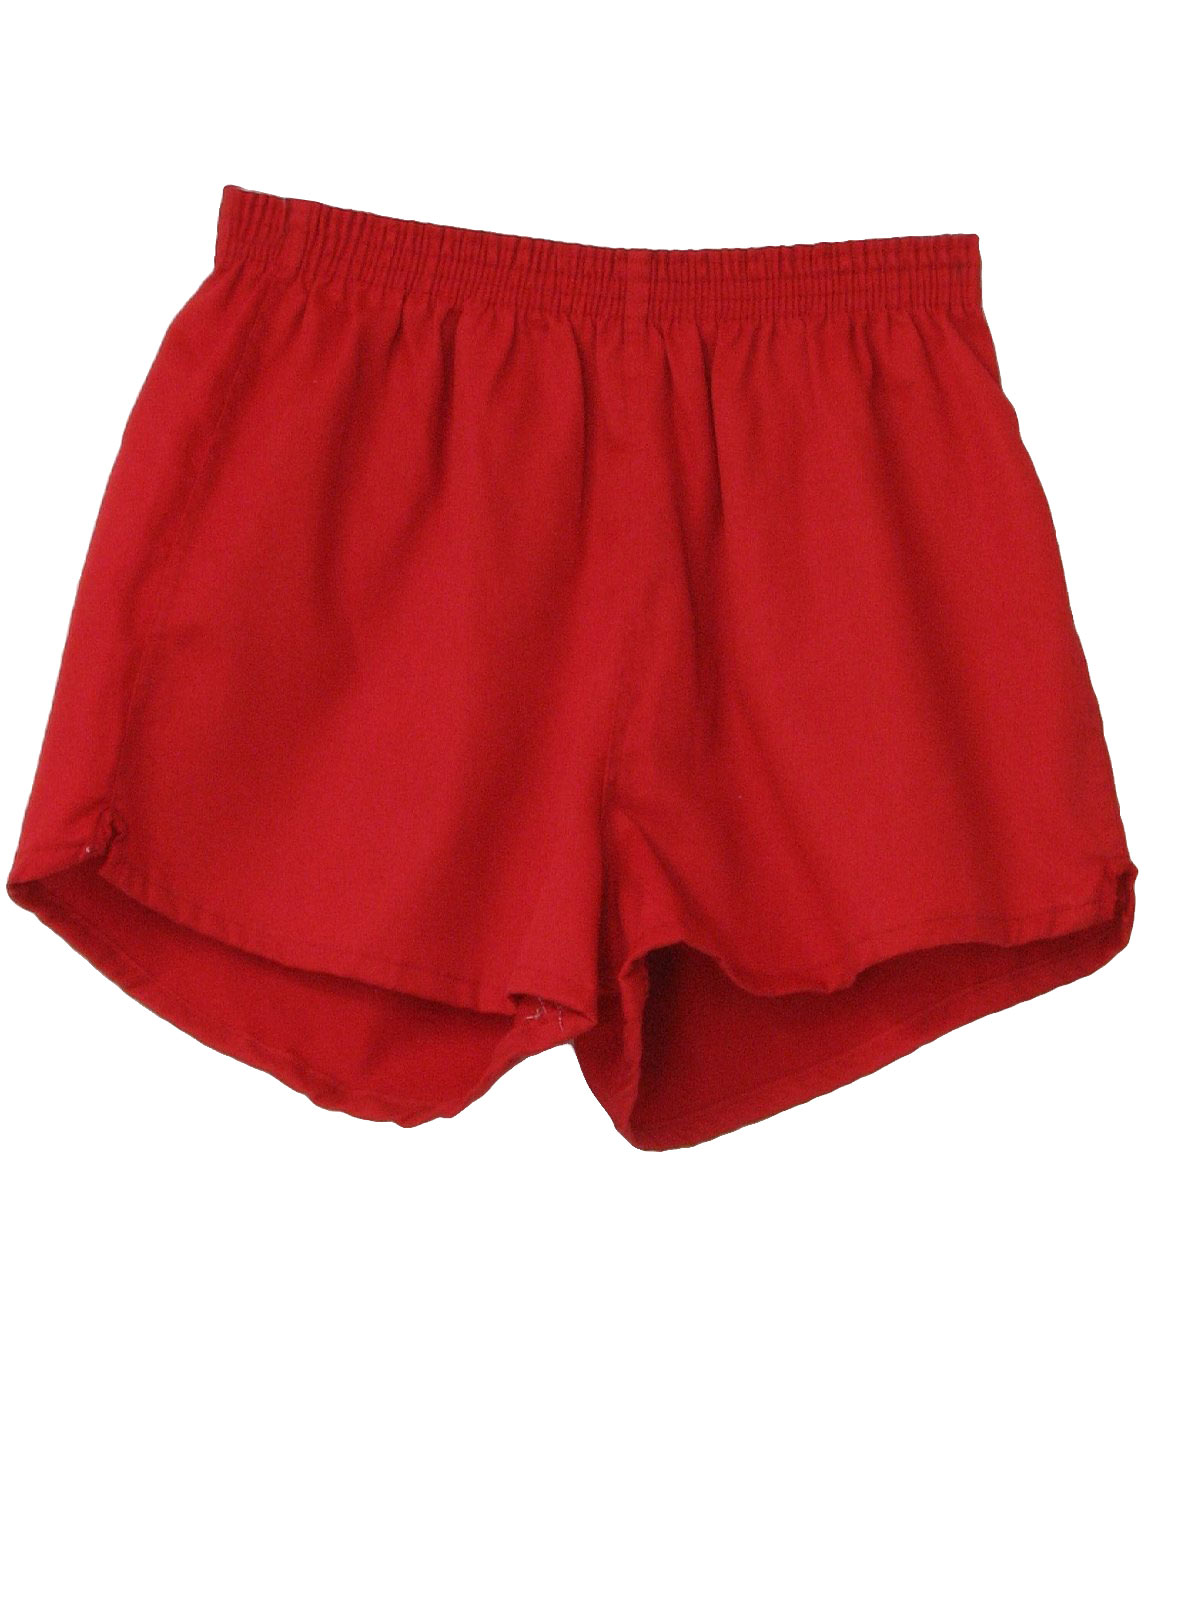 Retro 1980s Shorts: 80s -Size Label- Mens red polyester and cotton ...